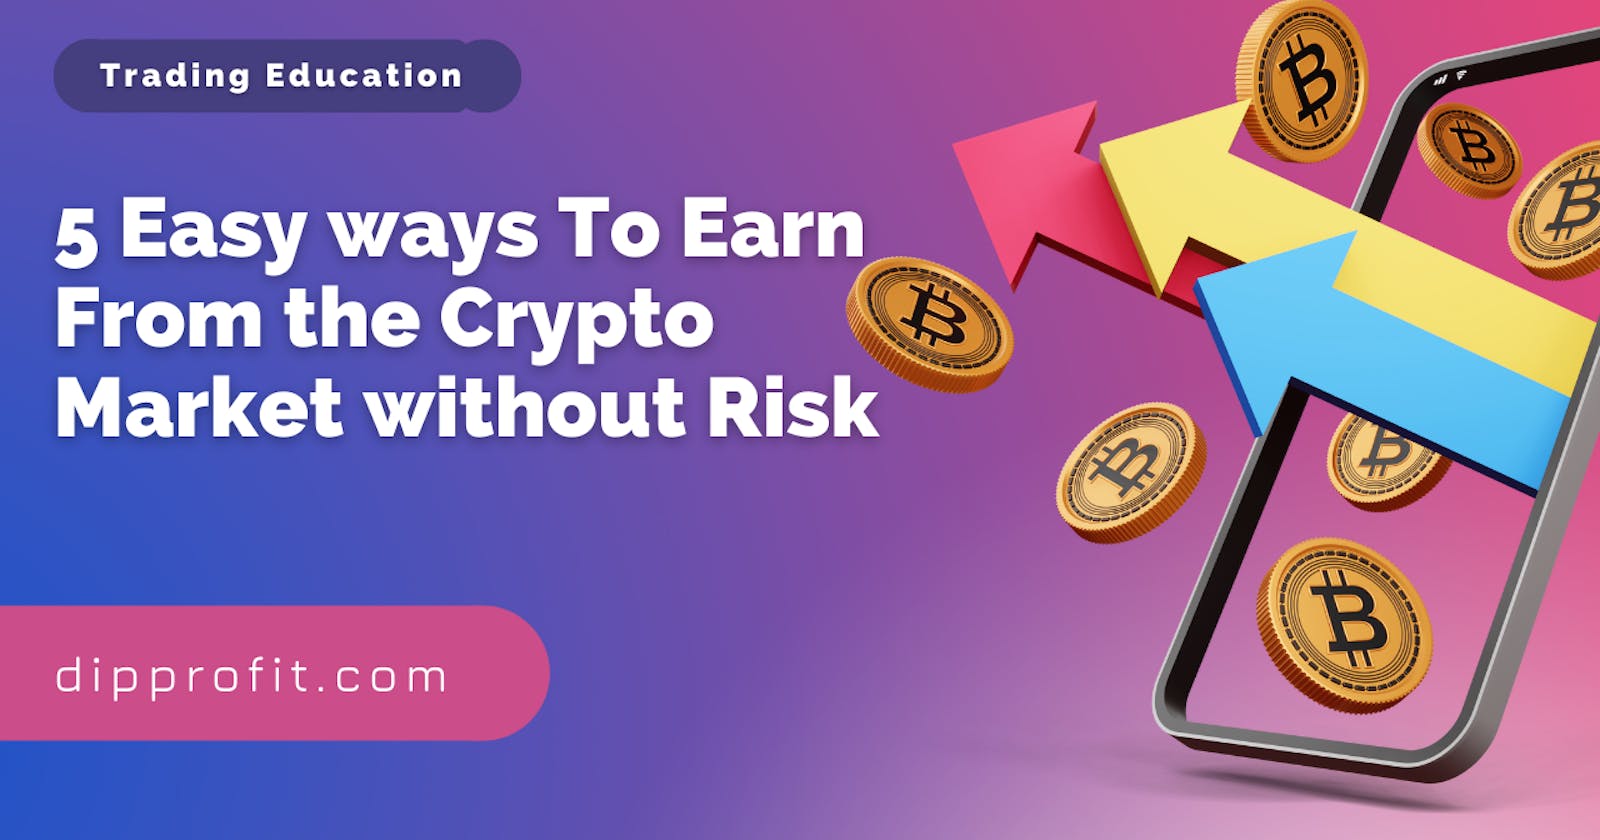 5 Easy Ways To Earn From The Cryptocurrency Market Without Risk